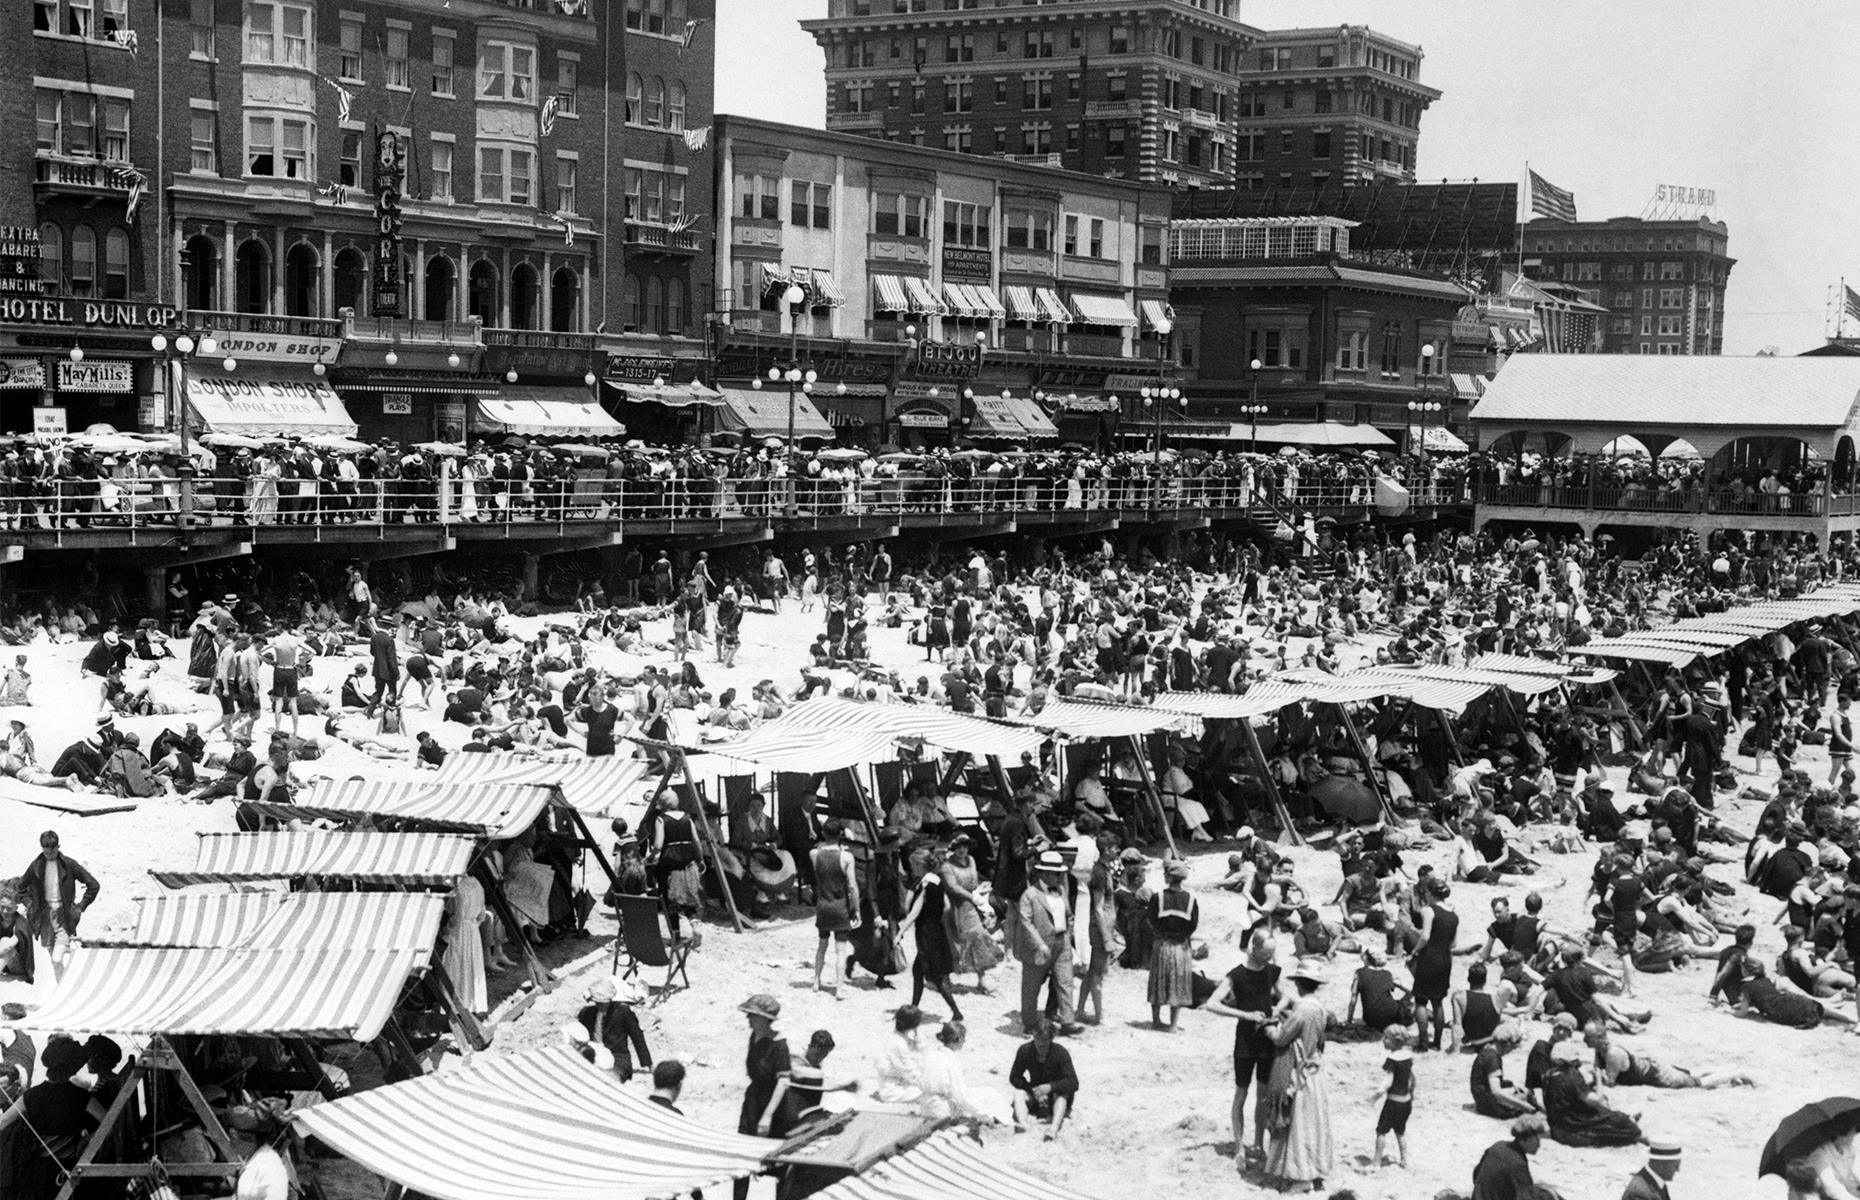 <p>Atlantic City Boardwalk has been a popular attraction ever since it was constructed in the 1870s, as well as attracting more people to Atlantic City beach, pictured here filled with sun-seekers in the Roaring Twenties. It's thought to be the first boardwalk of its kind in the United States, and has been lined with luxurious hotels, eclectic stores and restaurants since its earliest beginnings. <a href="https://www.loveexploring.com/galleries/98864/the-worlds-most-historic-boardwalks-and-piers?page=1">Check out more historic boardwalks and piers here</a>.</p>